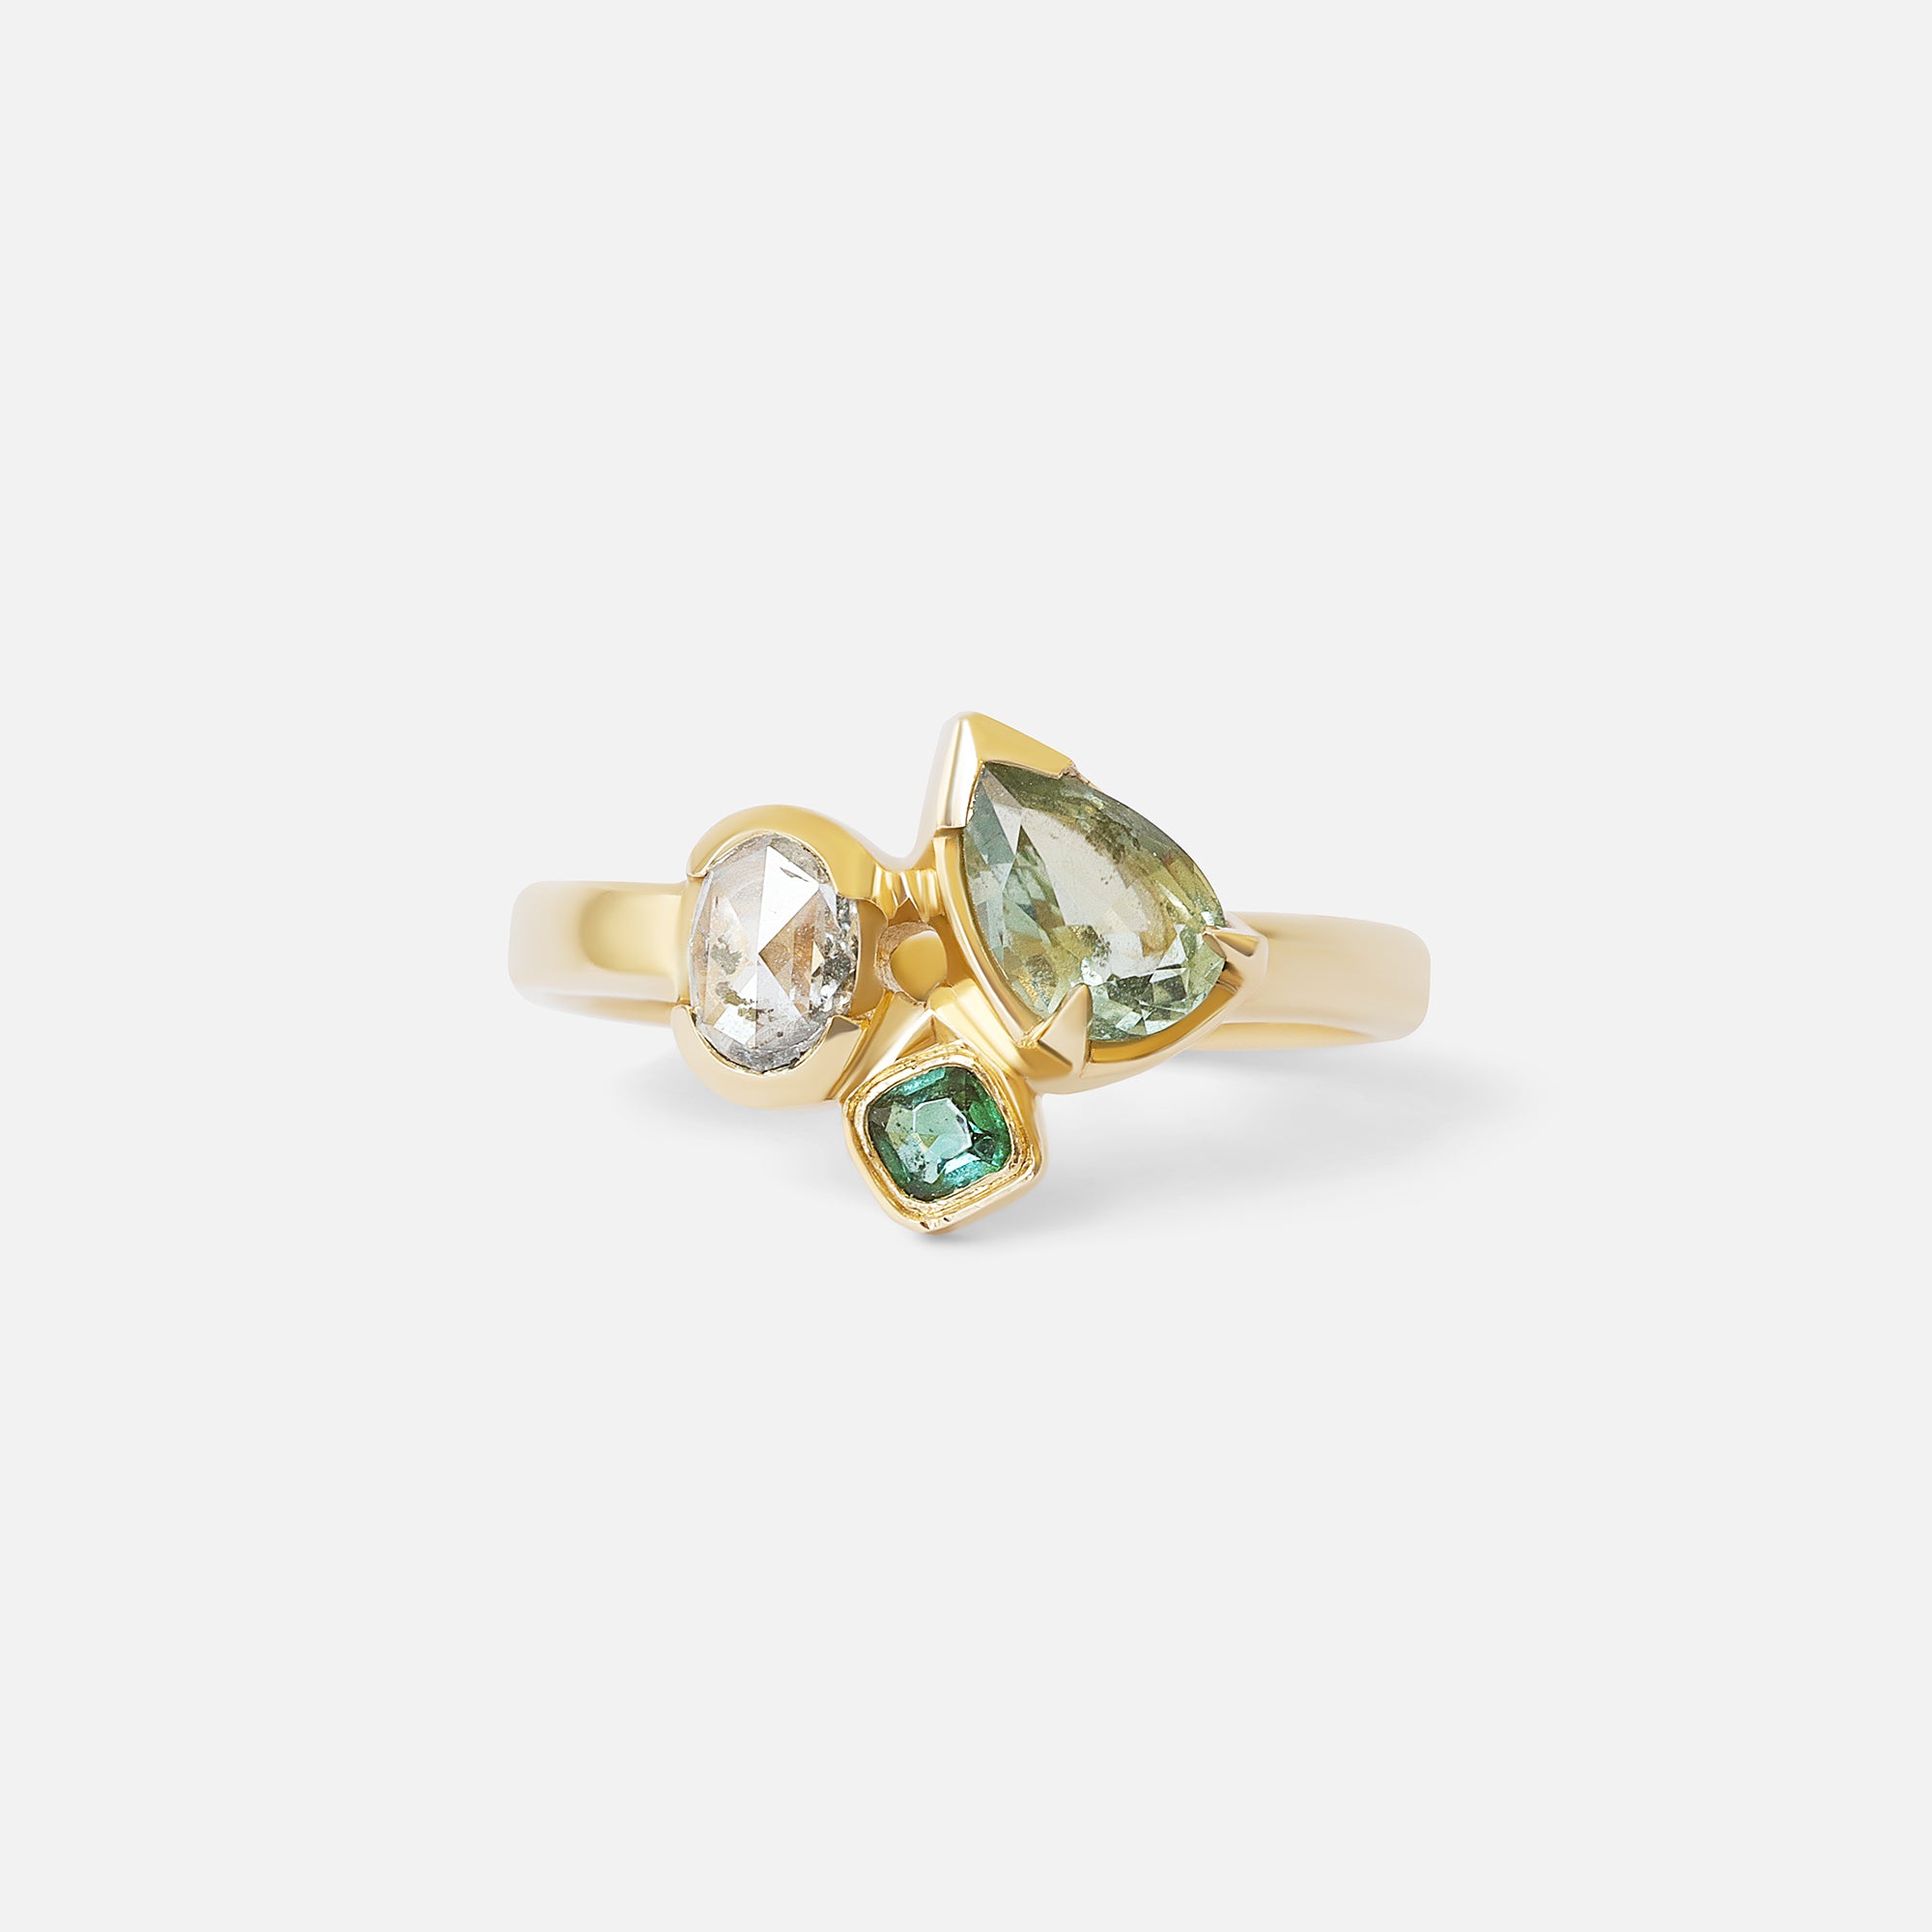 Paraiba and Diamond Droplet / Ring By Kestrel Dillon in ENGAGEMENT Category